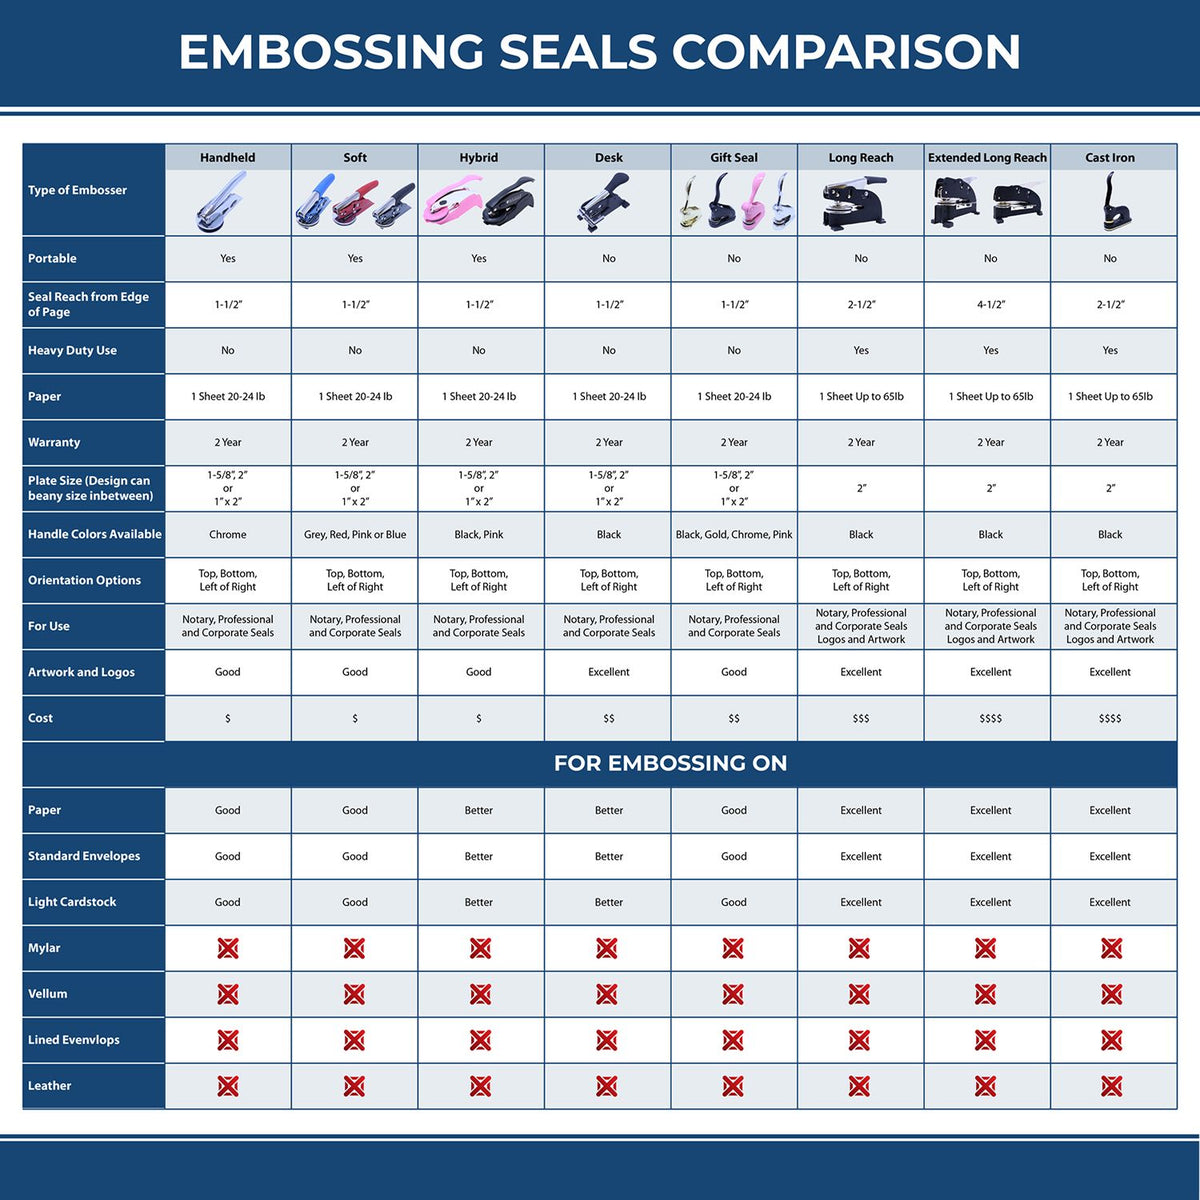 A comparison chart for the different types of mount models available for the Heavy Duty Cast Iron New Jersey Architect Embosser.